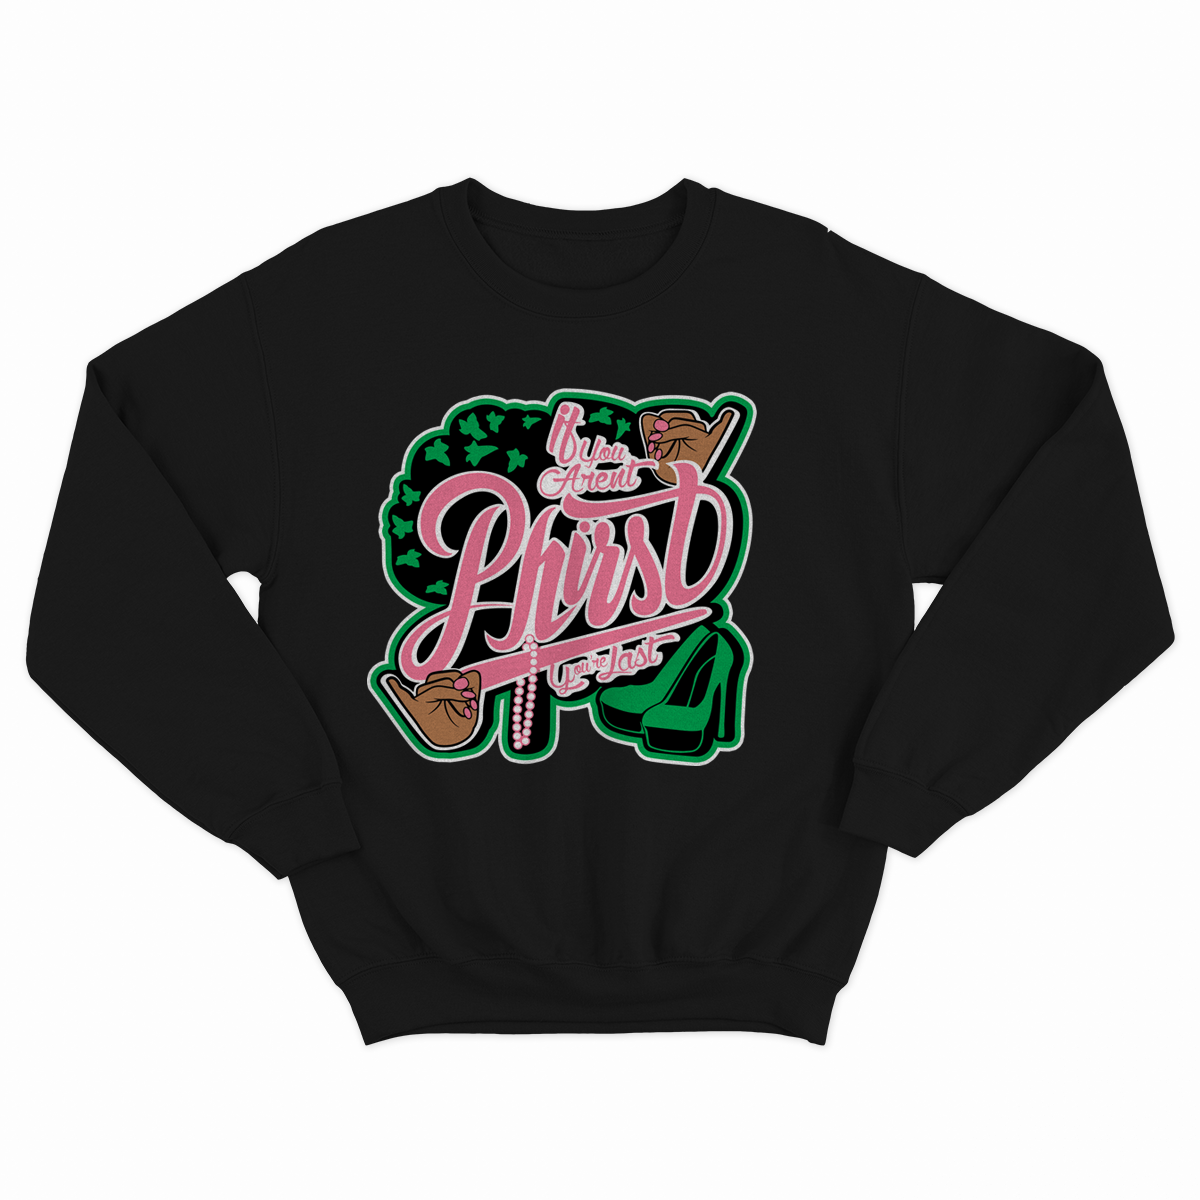 Black If You Aren't Phirst You're Last Crewneck